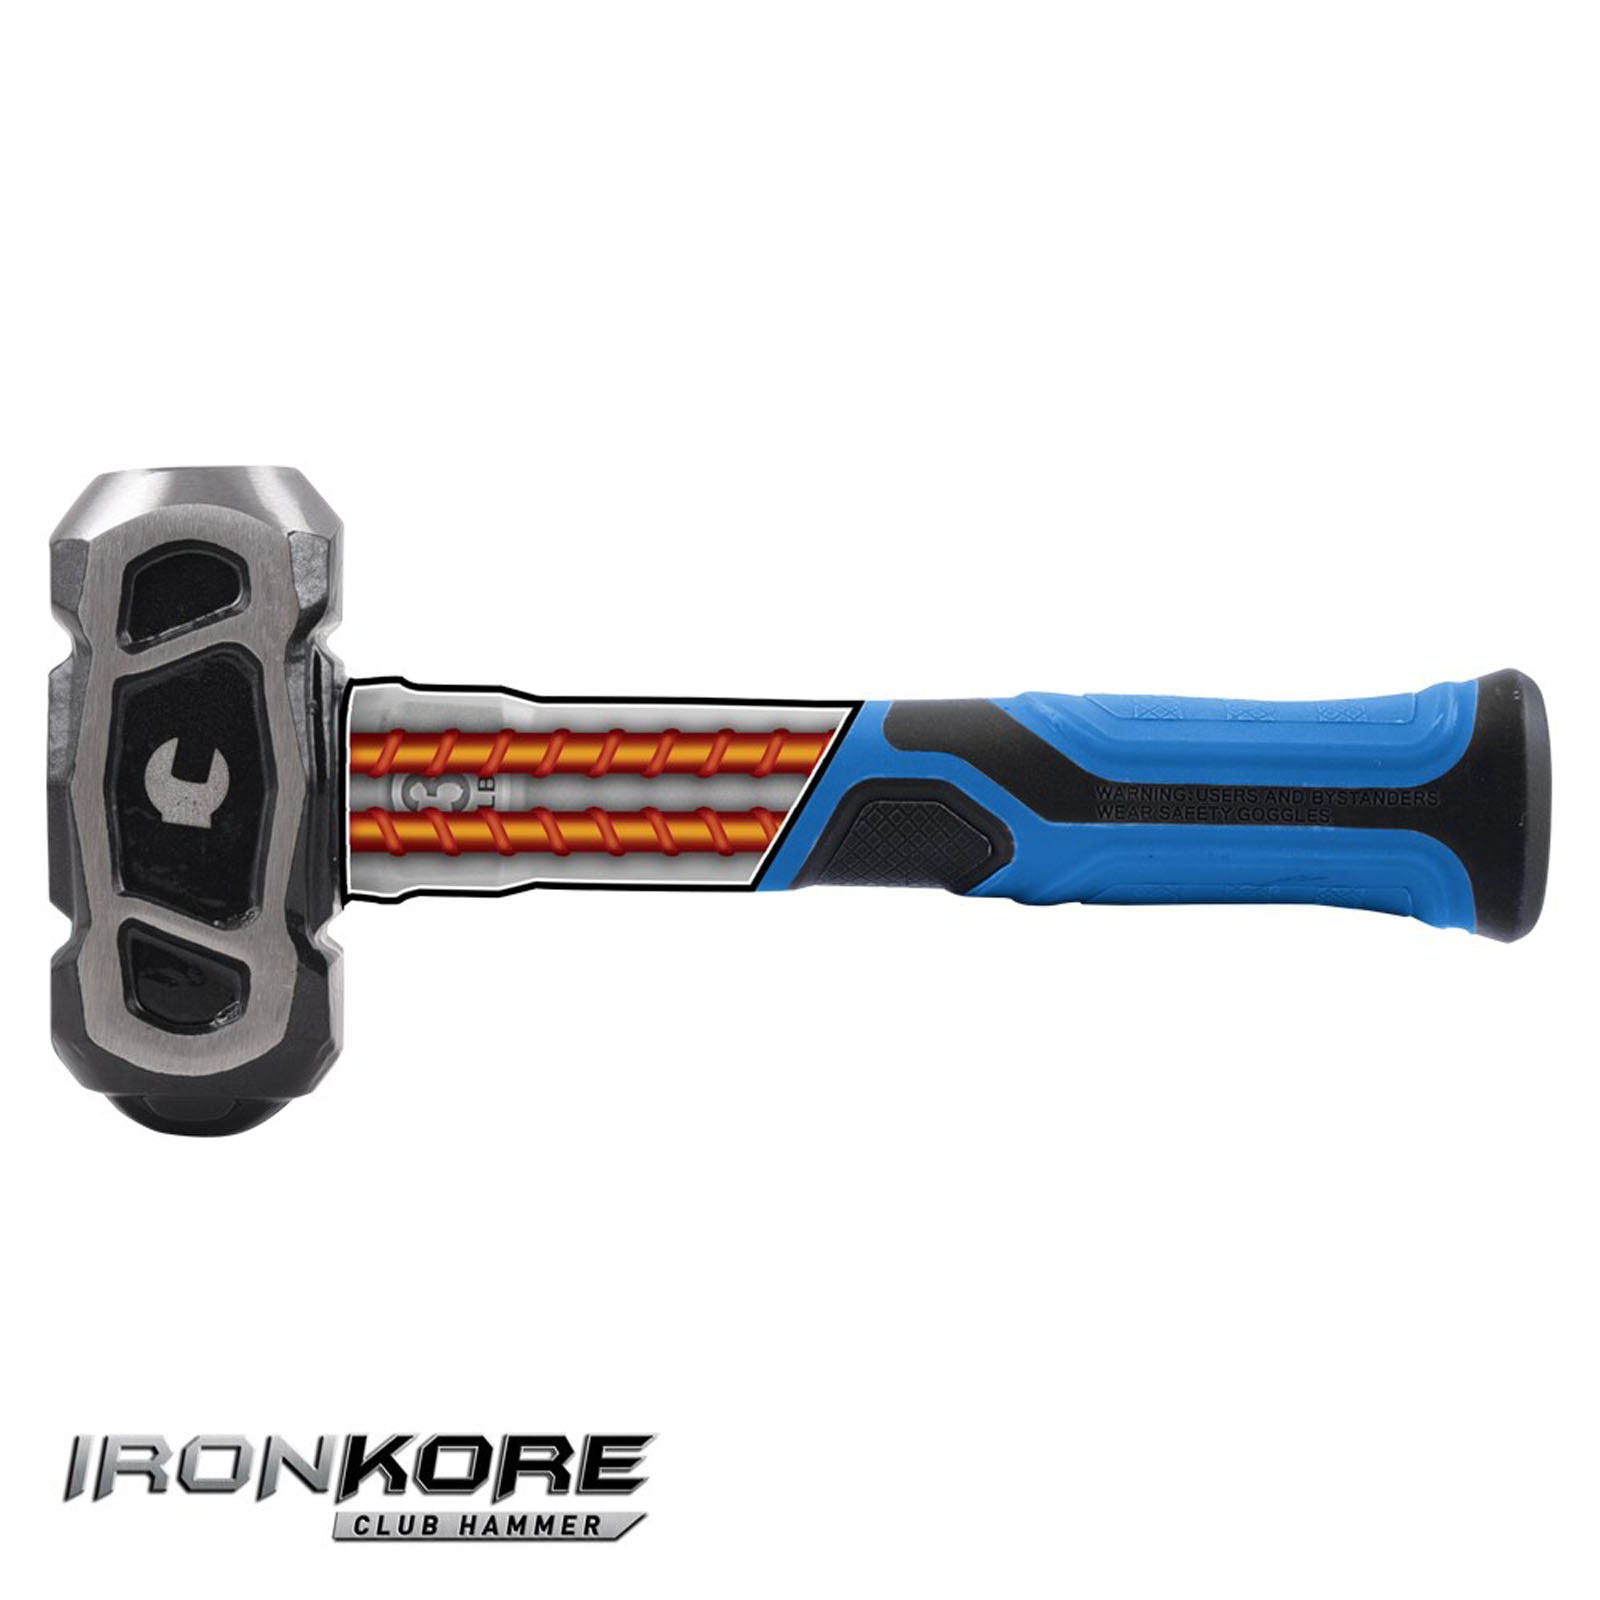 IRONKORE Club Hammer 1.35kg/3LB - K9083 by Kincrome